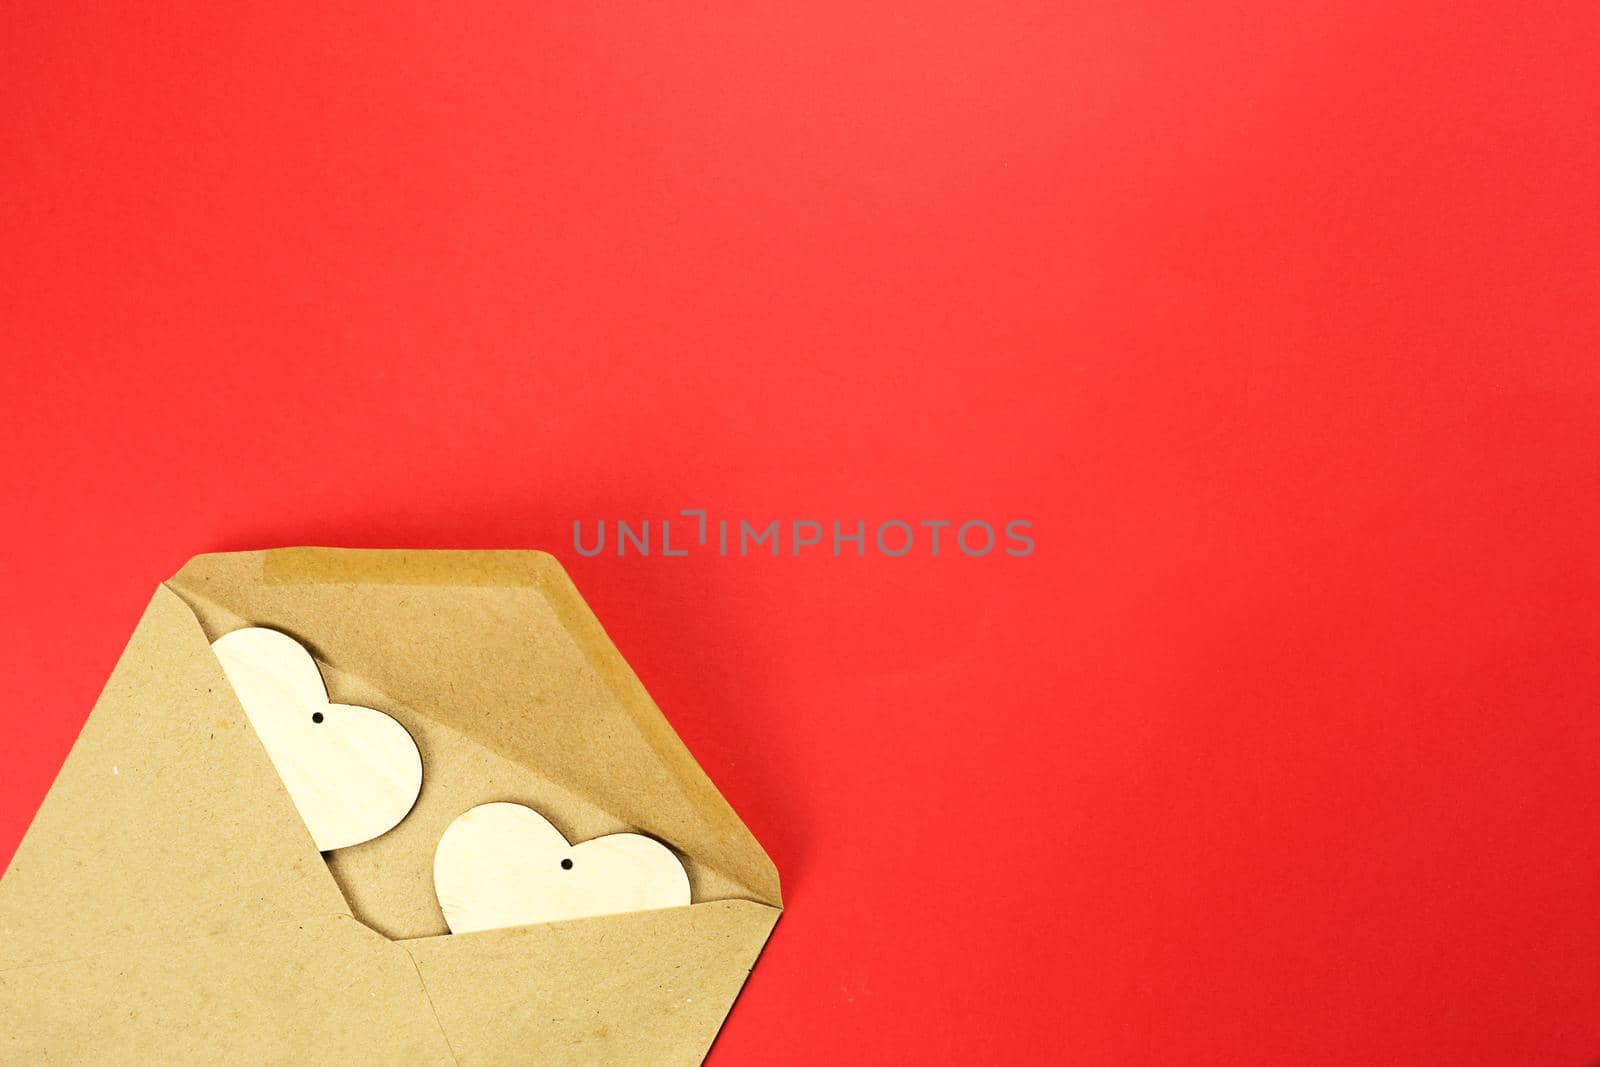 Wooden hearts spill out of an open envelope on a red background. Valentine's Day, love letter, declaration of love, acquaintance. Copy space, mock up